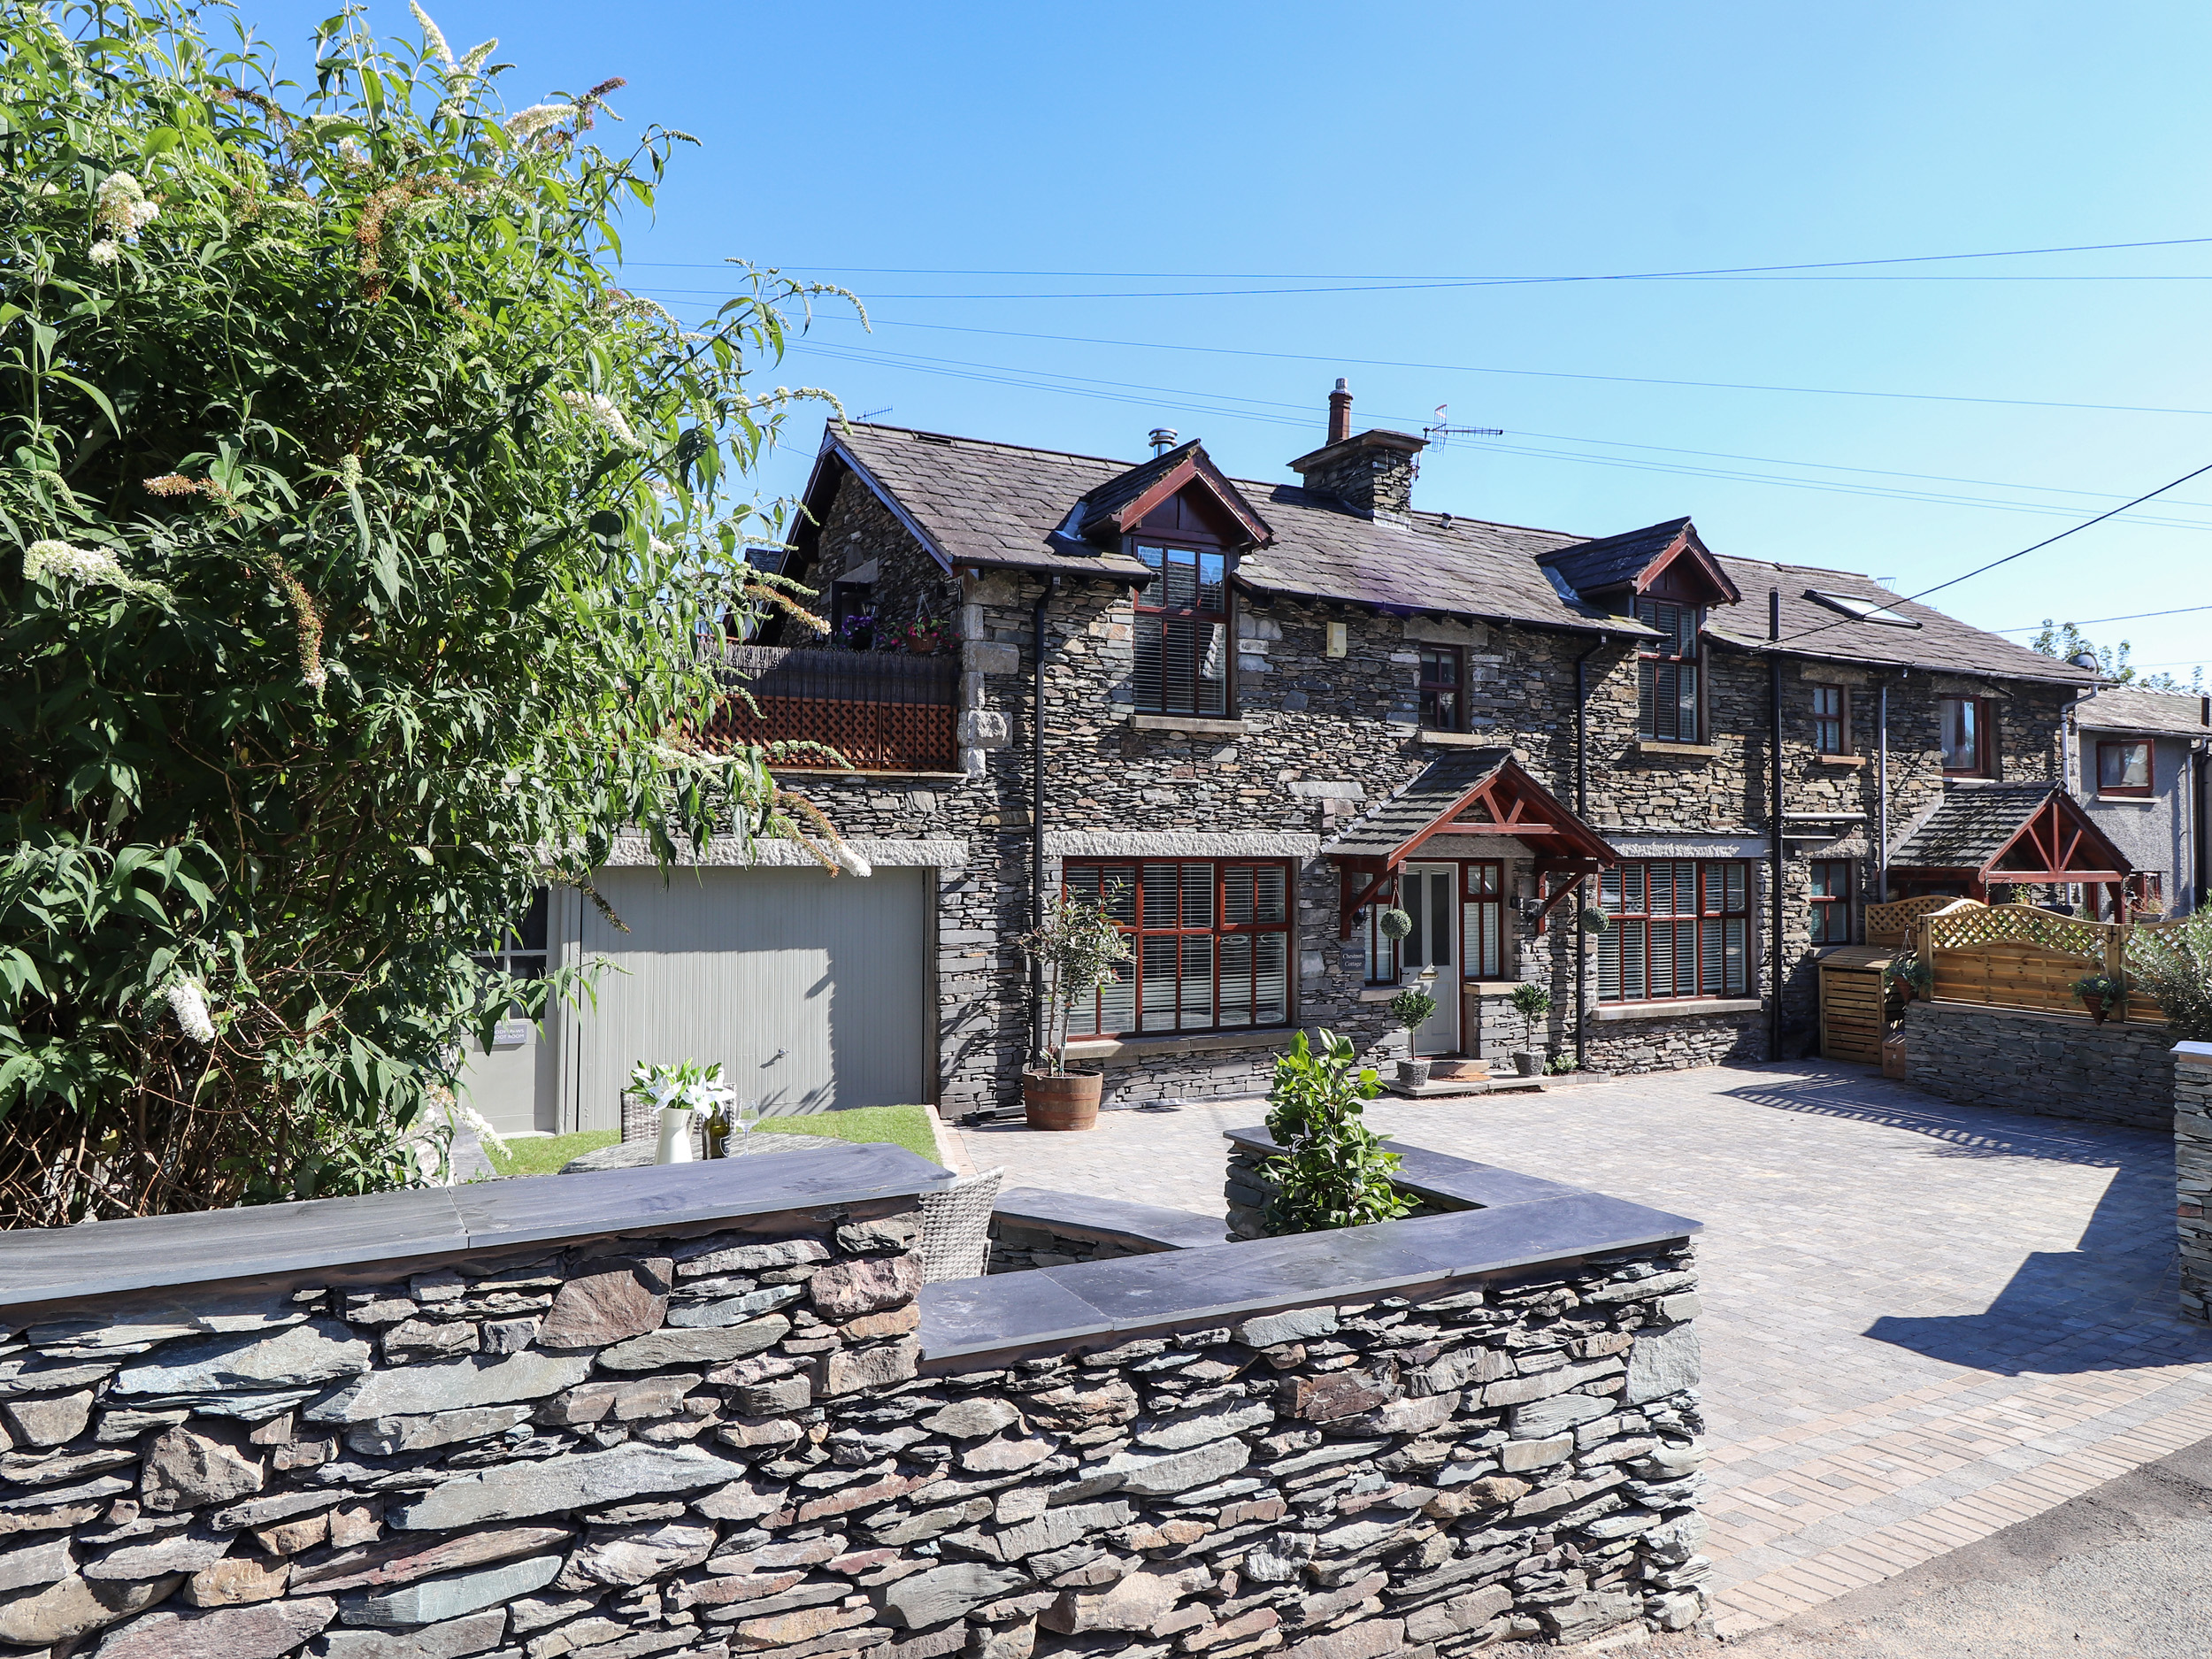 130 M² Cottage ∙ 3 Bedrooms ∙ 6 Guests - Bowness-on-Windermere